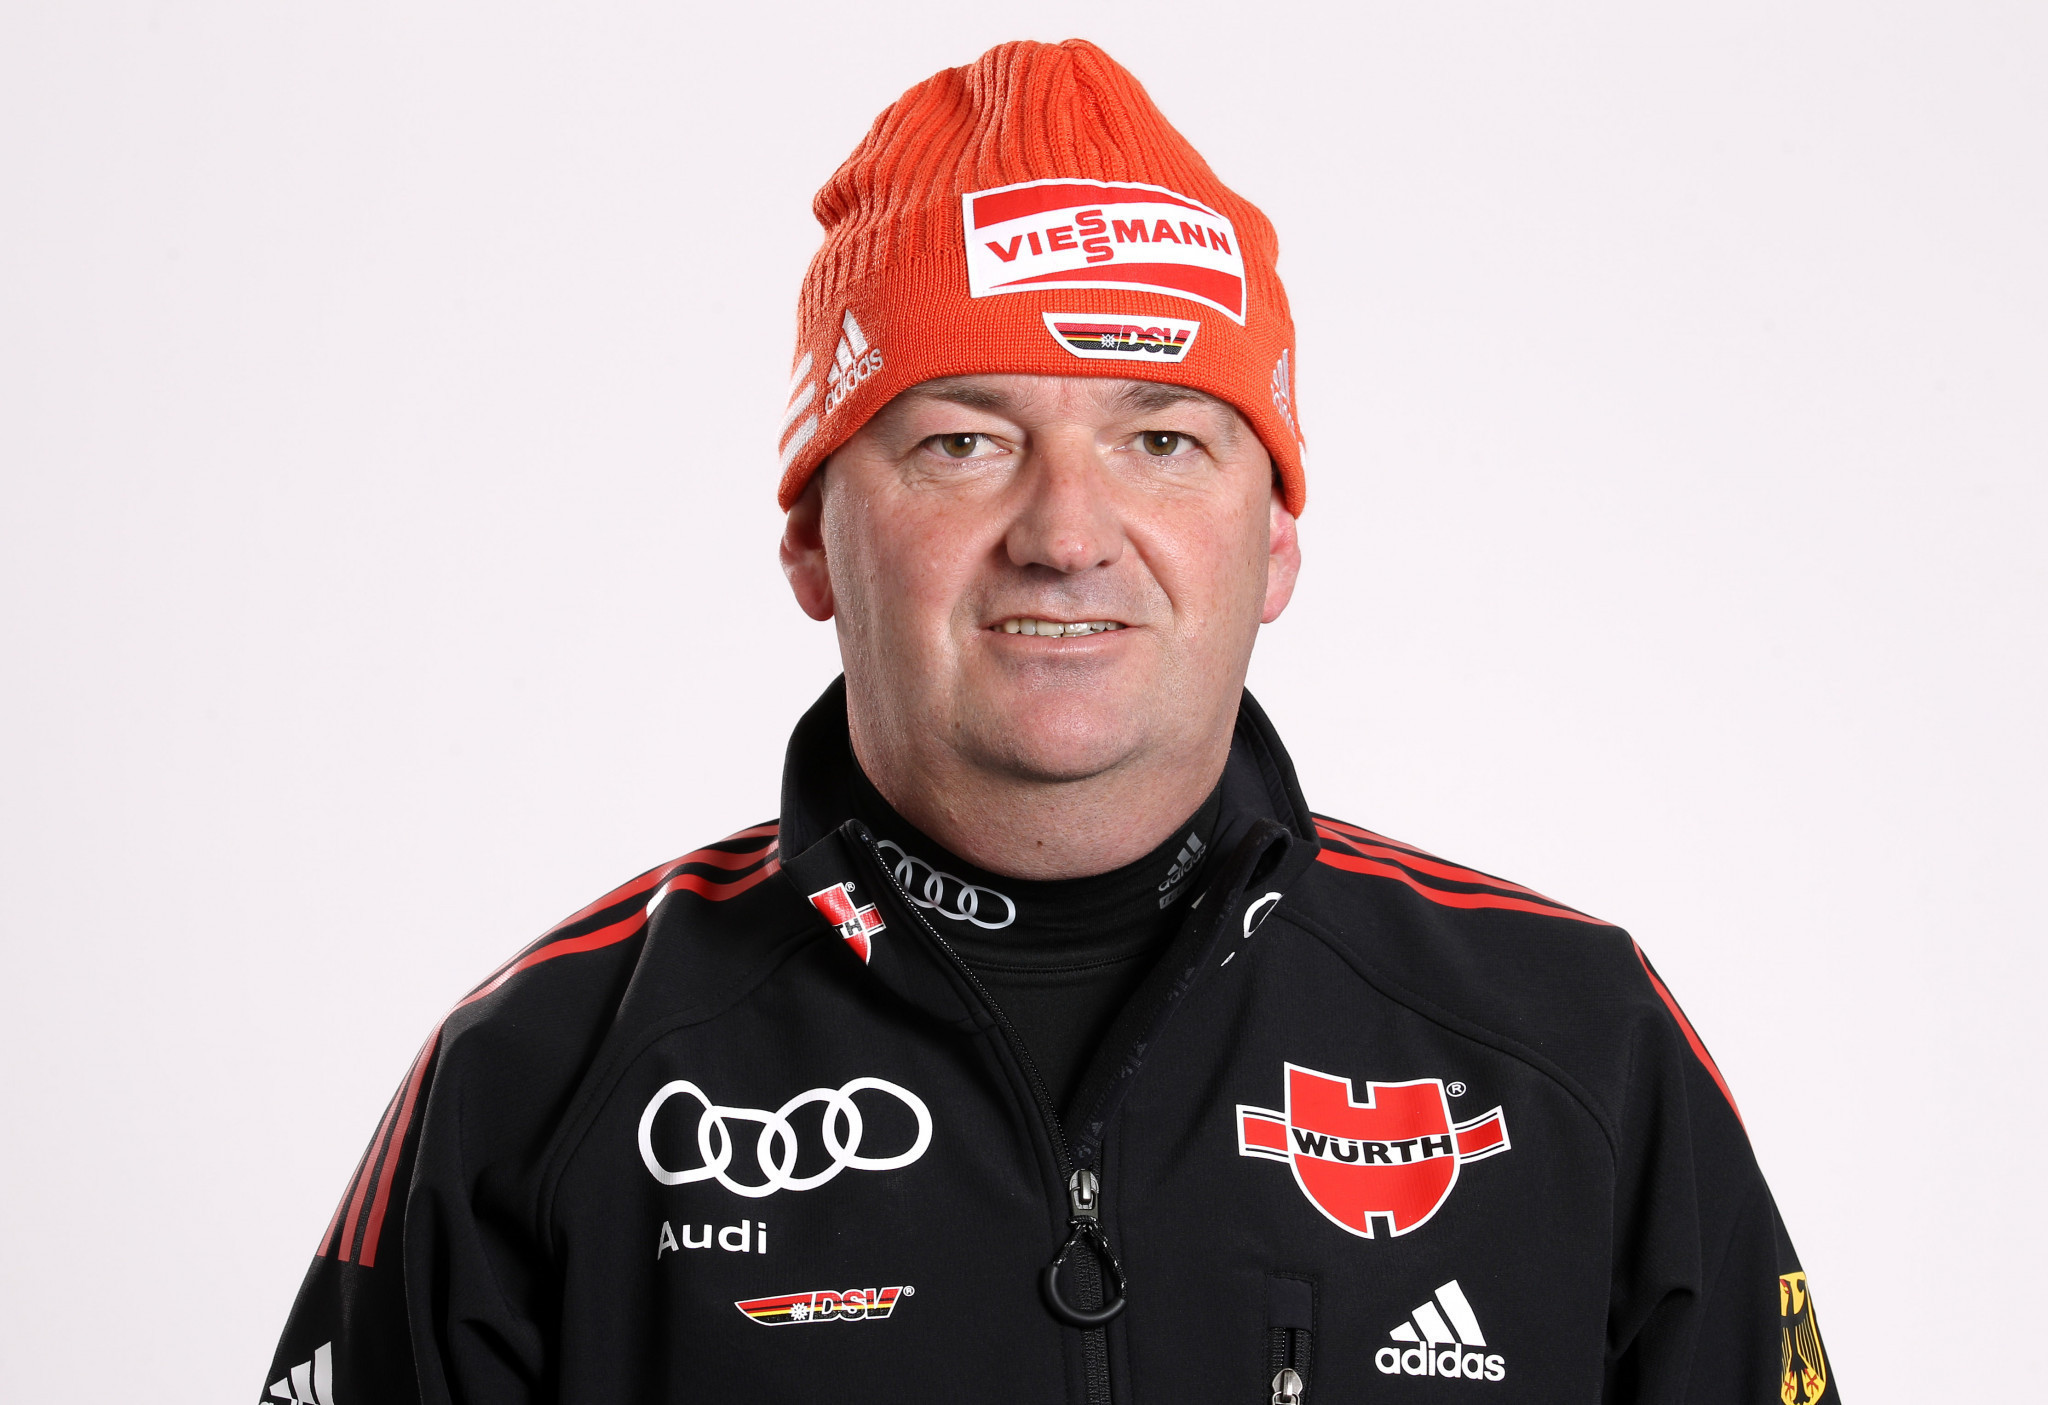 German Markus Kramer coached the Russian national cross-country skiing team from 2015 to 2022, but did not have his contract renewed in part due to sanctions against the country ©Getty Images